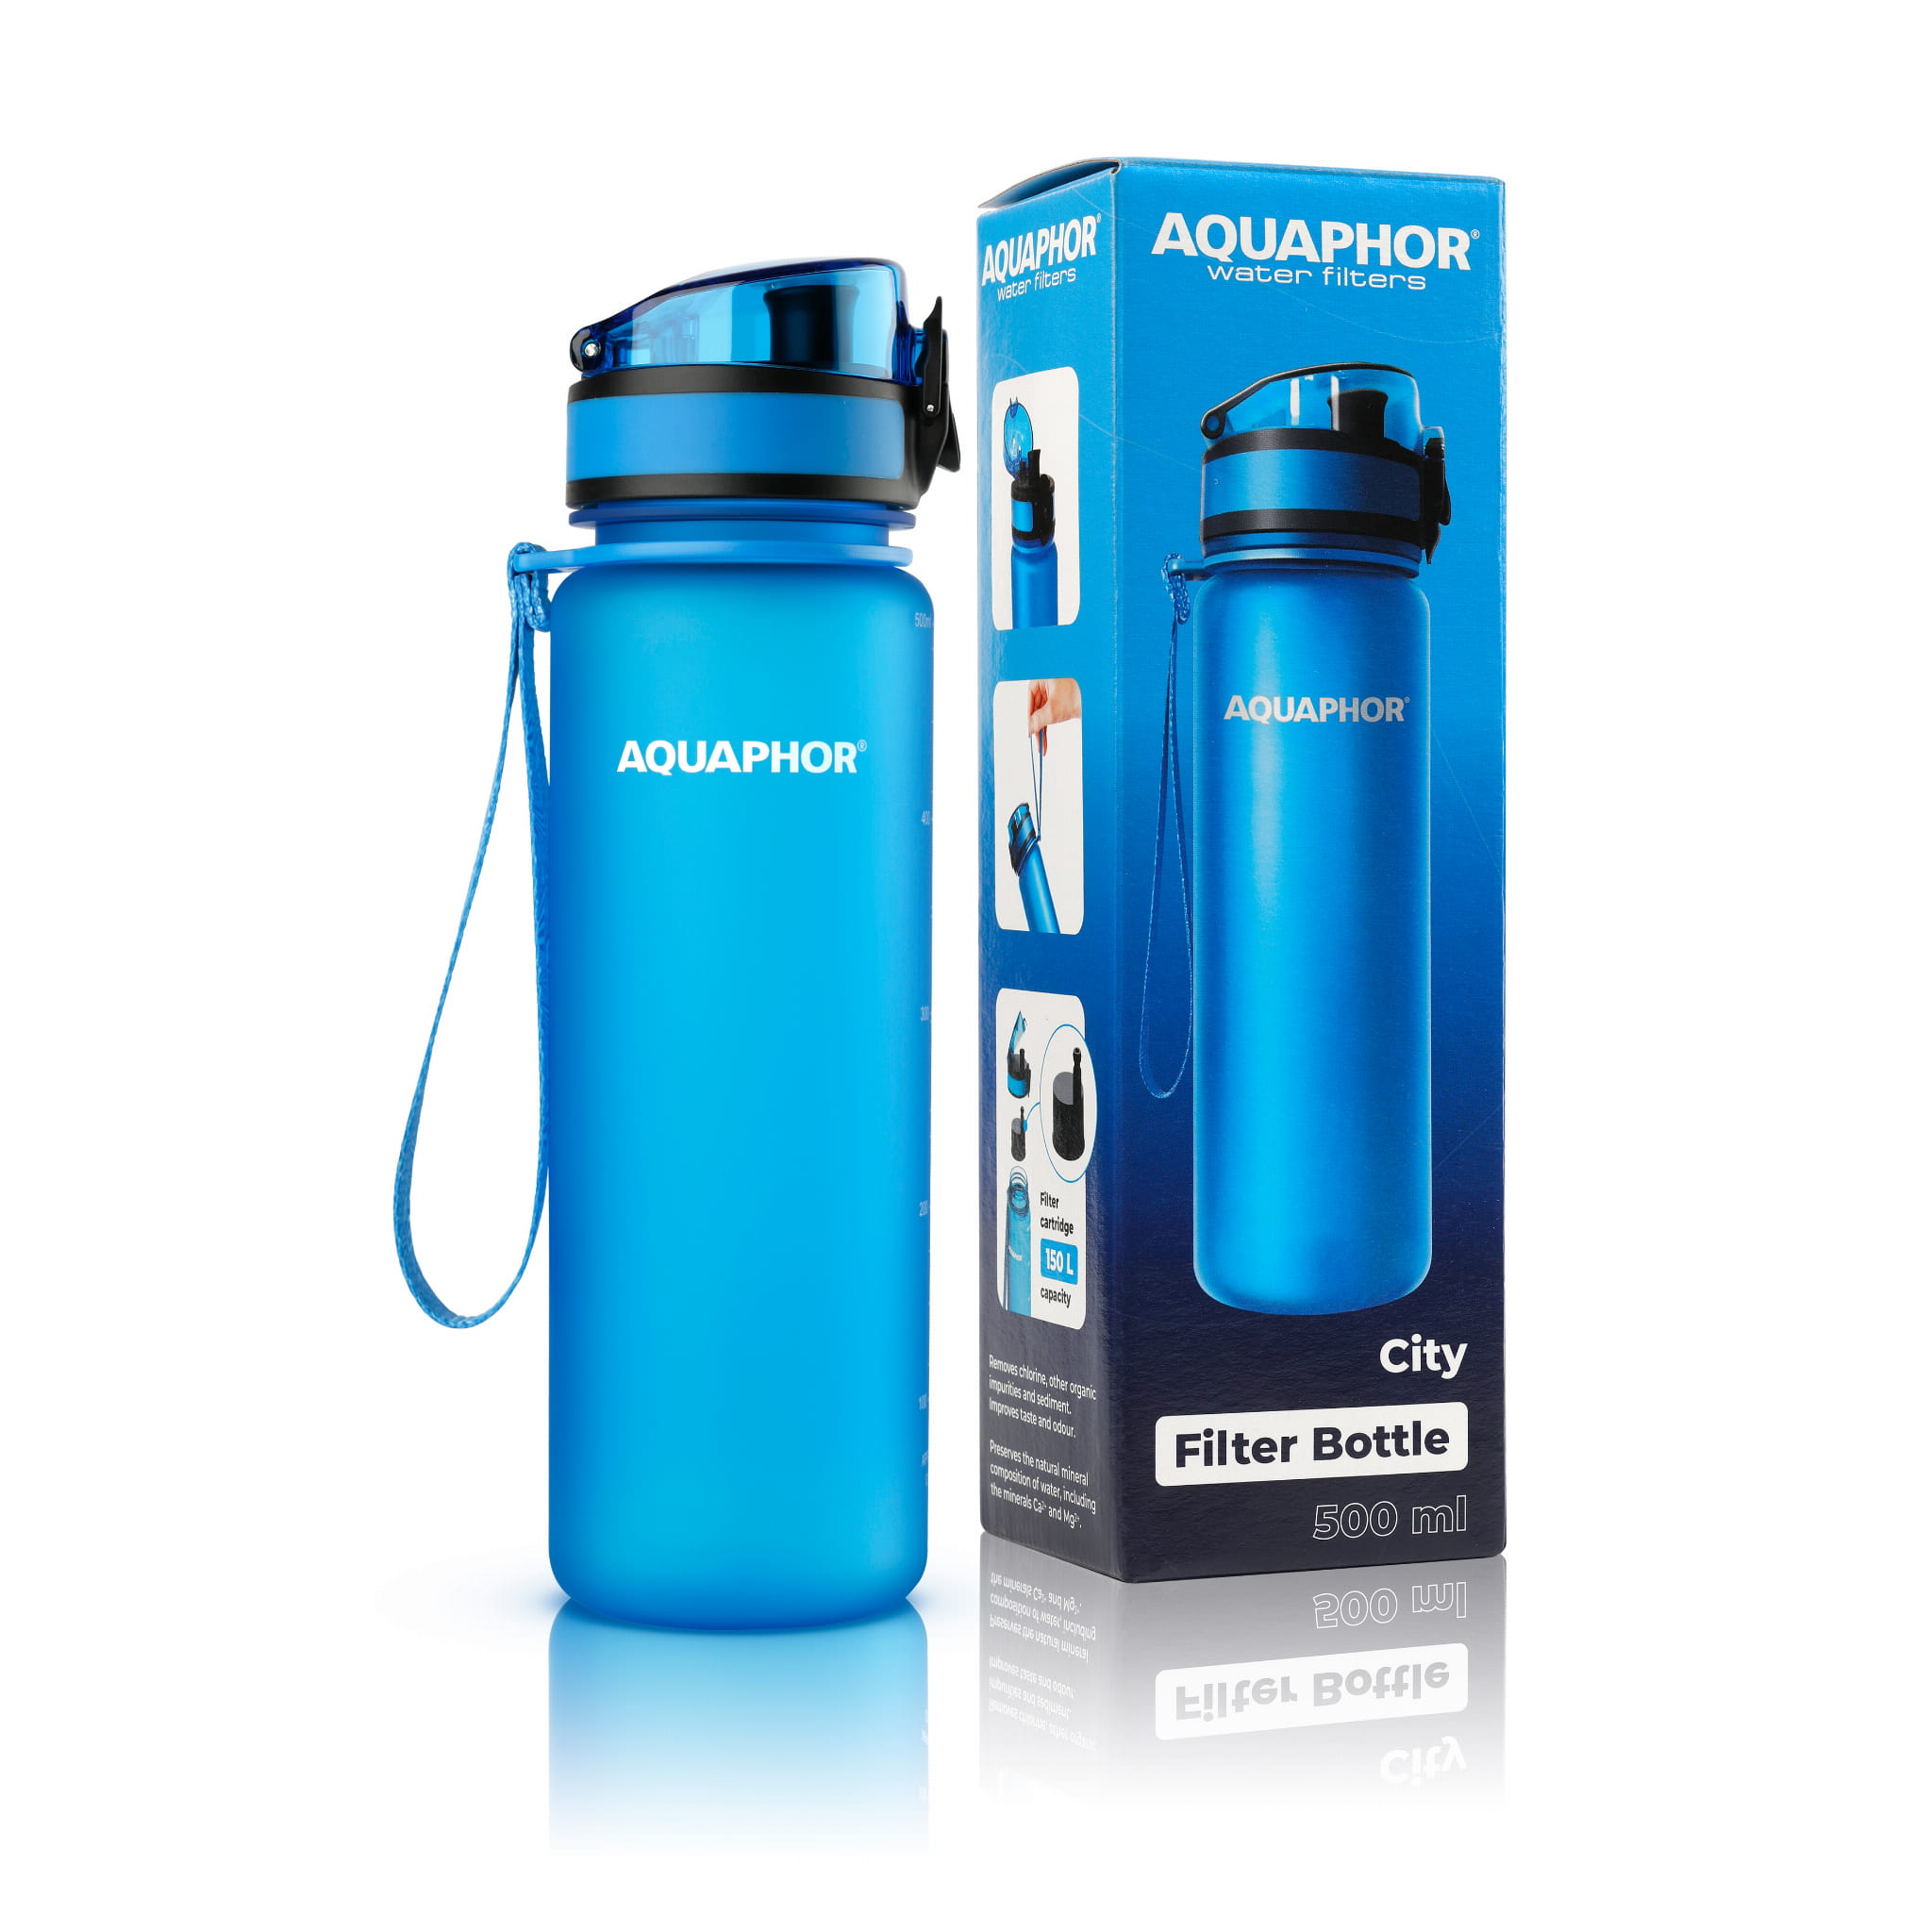 Aquaphor Water Filters City Filter Bottle 500ml RRP 13.99 CLEARANCE XL 8.99